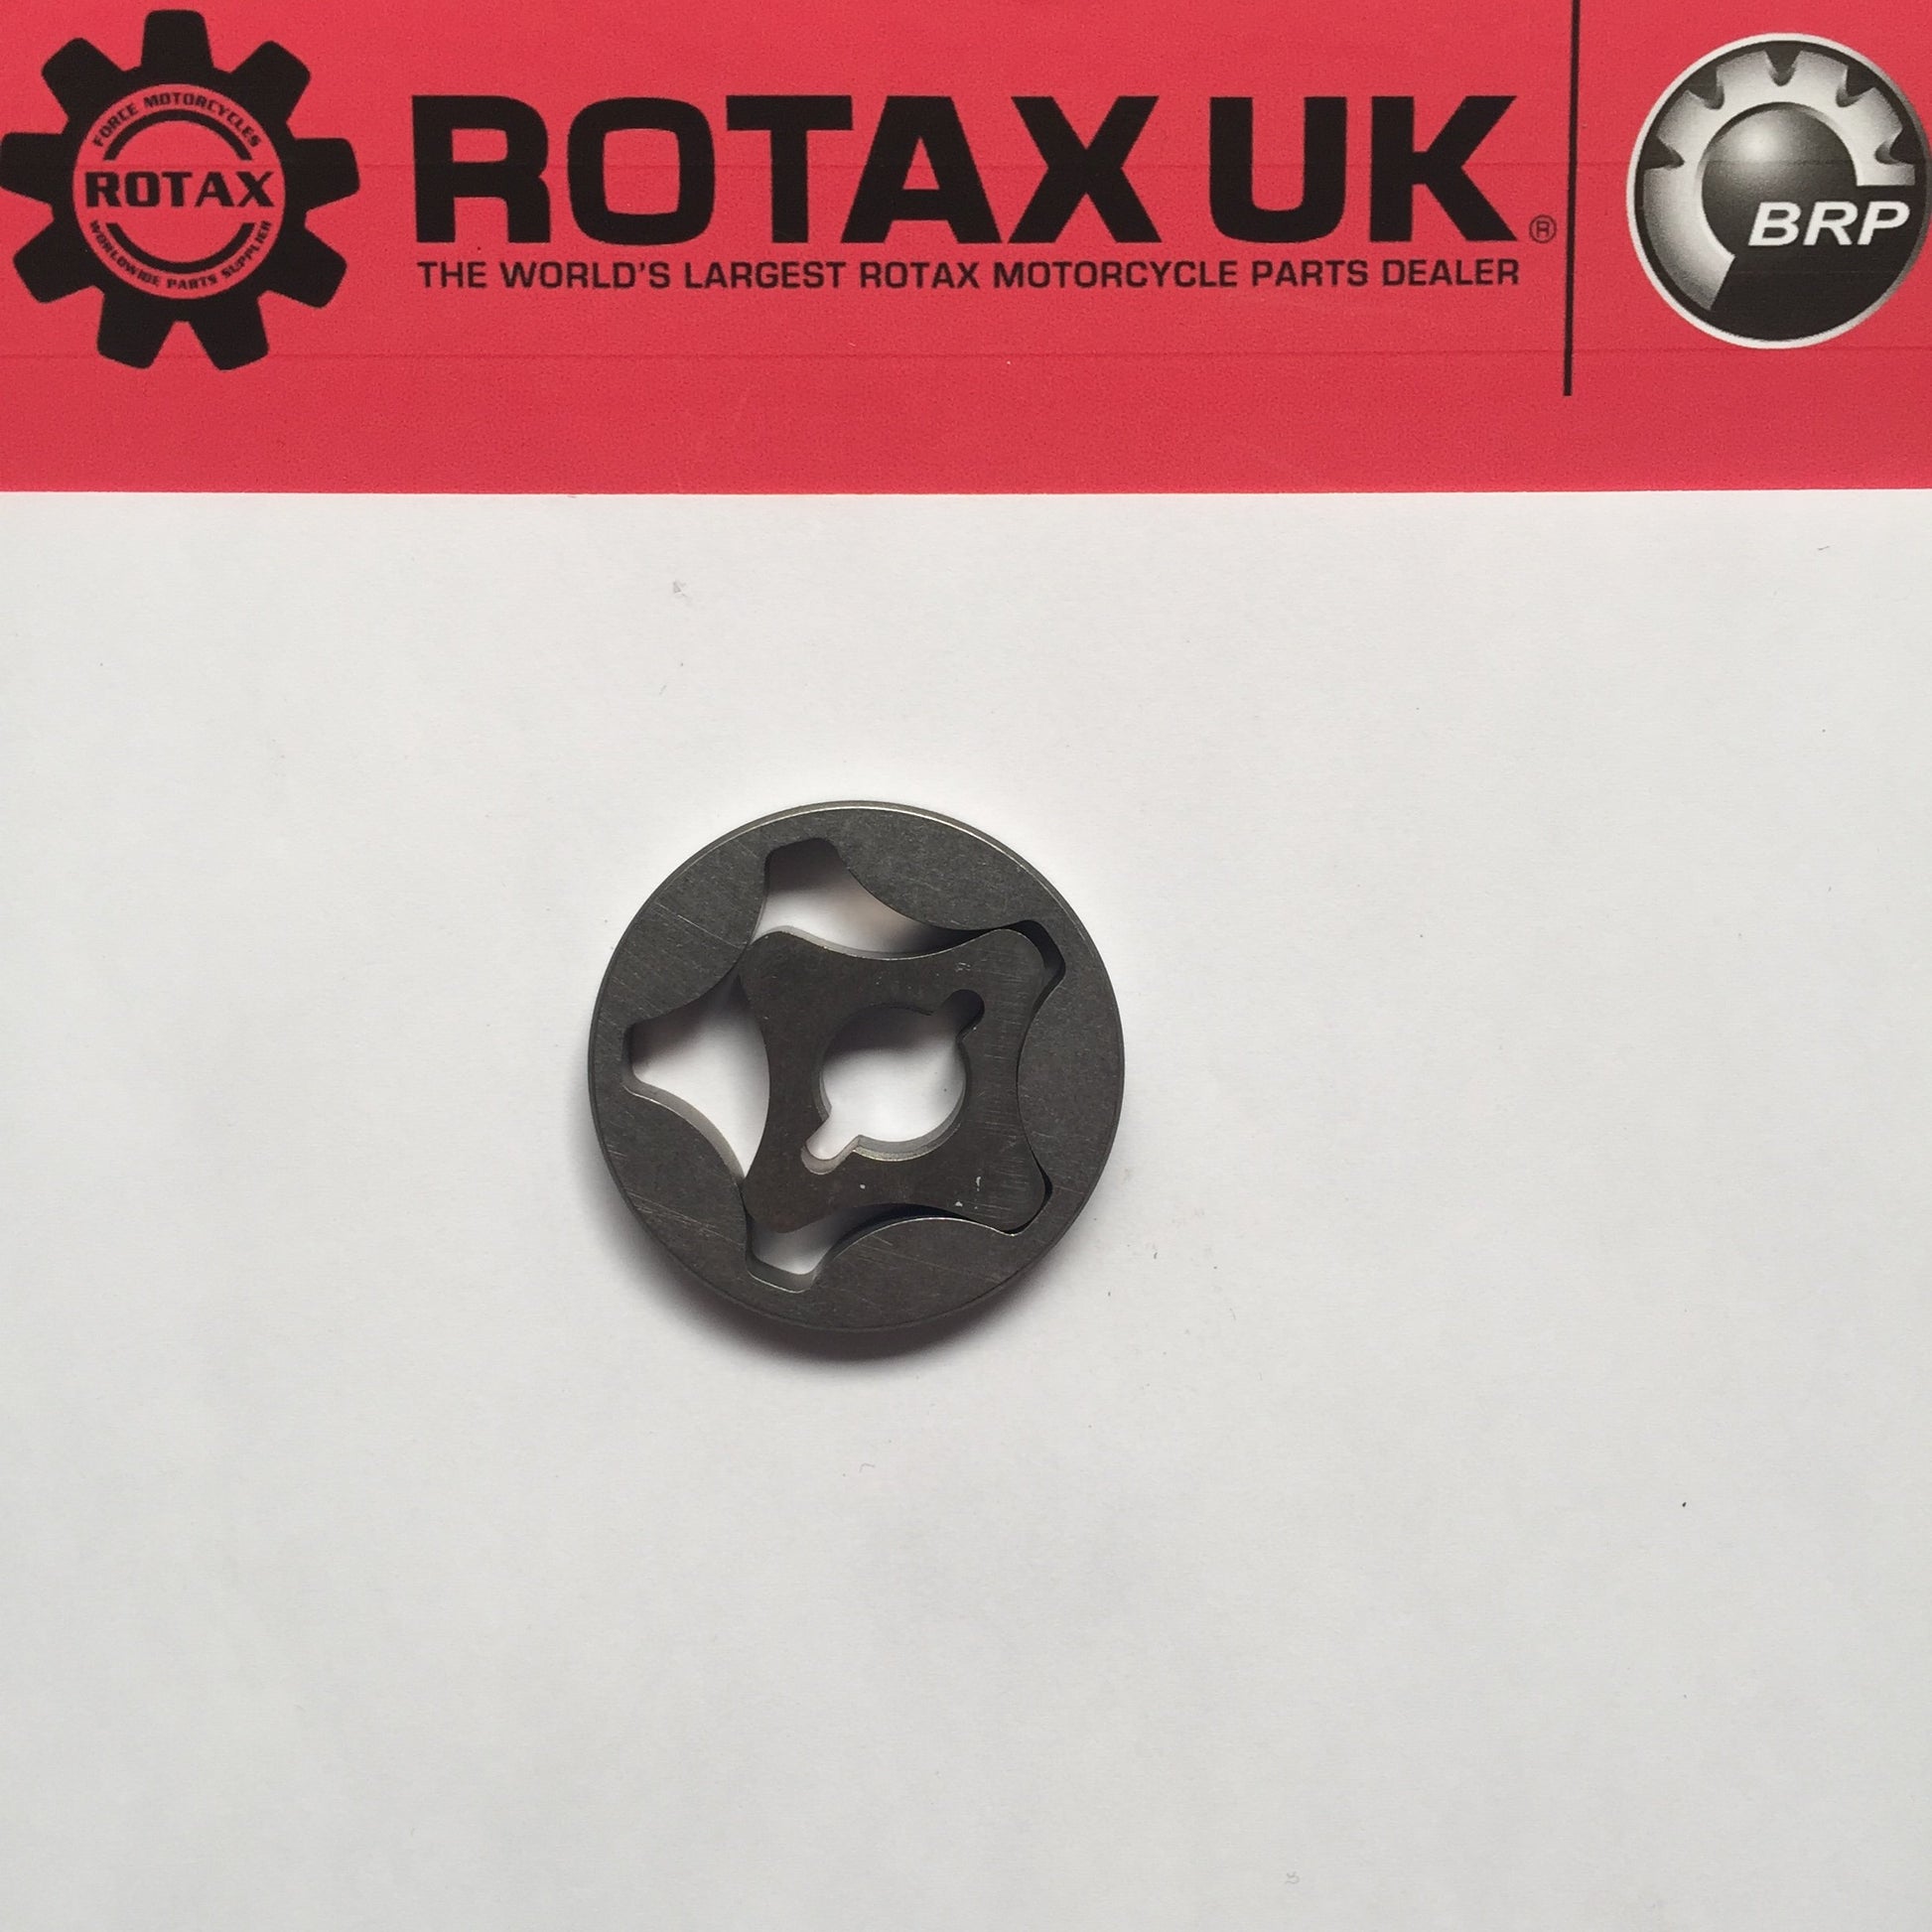 256115 - Inner & Outer Rotor Assembly 6mm for various engine types.